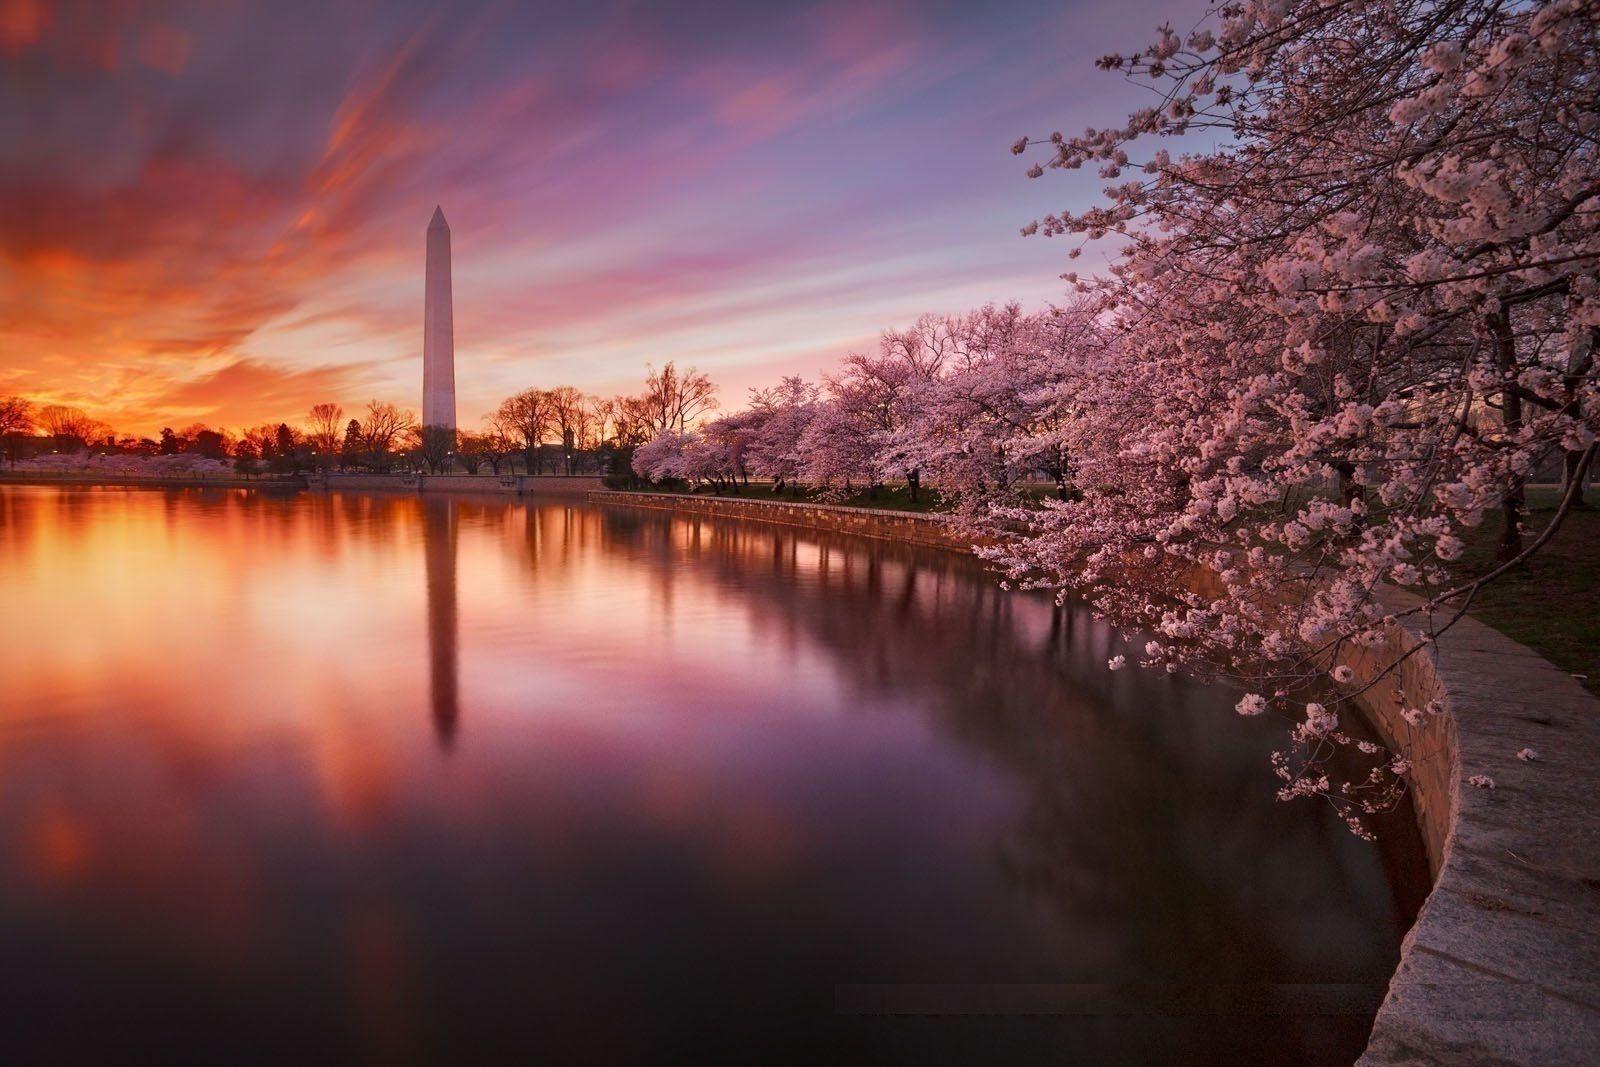 Sunset Cherry Blossom Wallpapers - Top Free Sunset Cherry Blossom